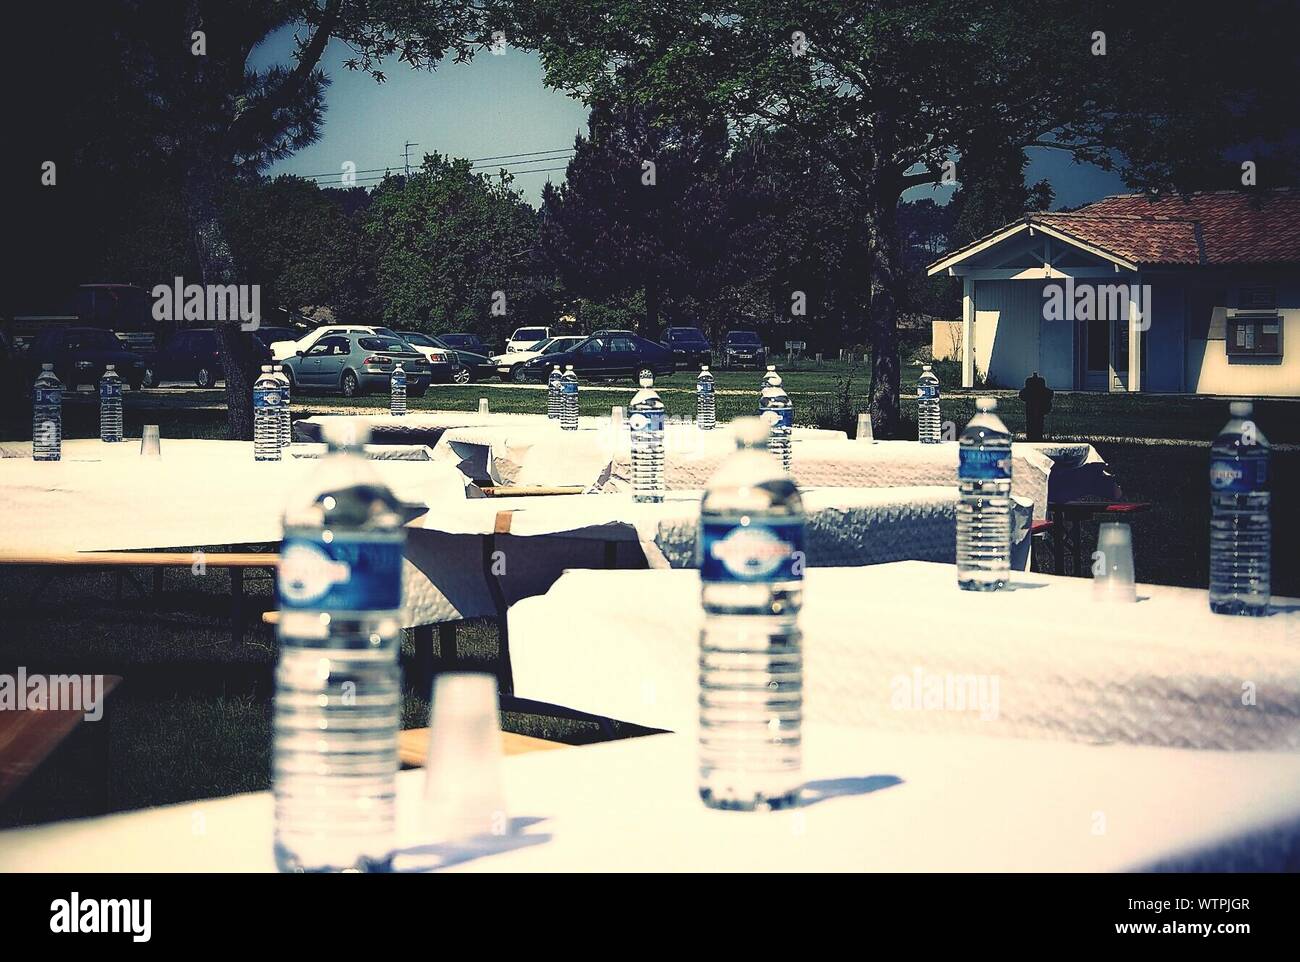 View Of Water Bottles On Outdoor Tables Stock Photo